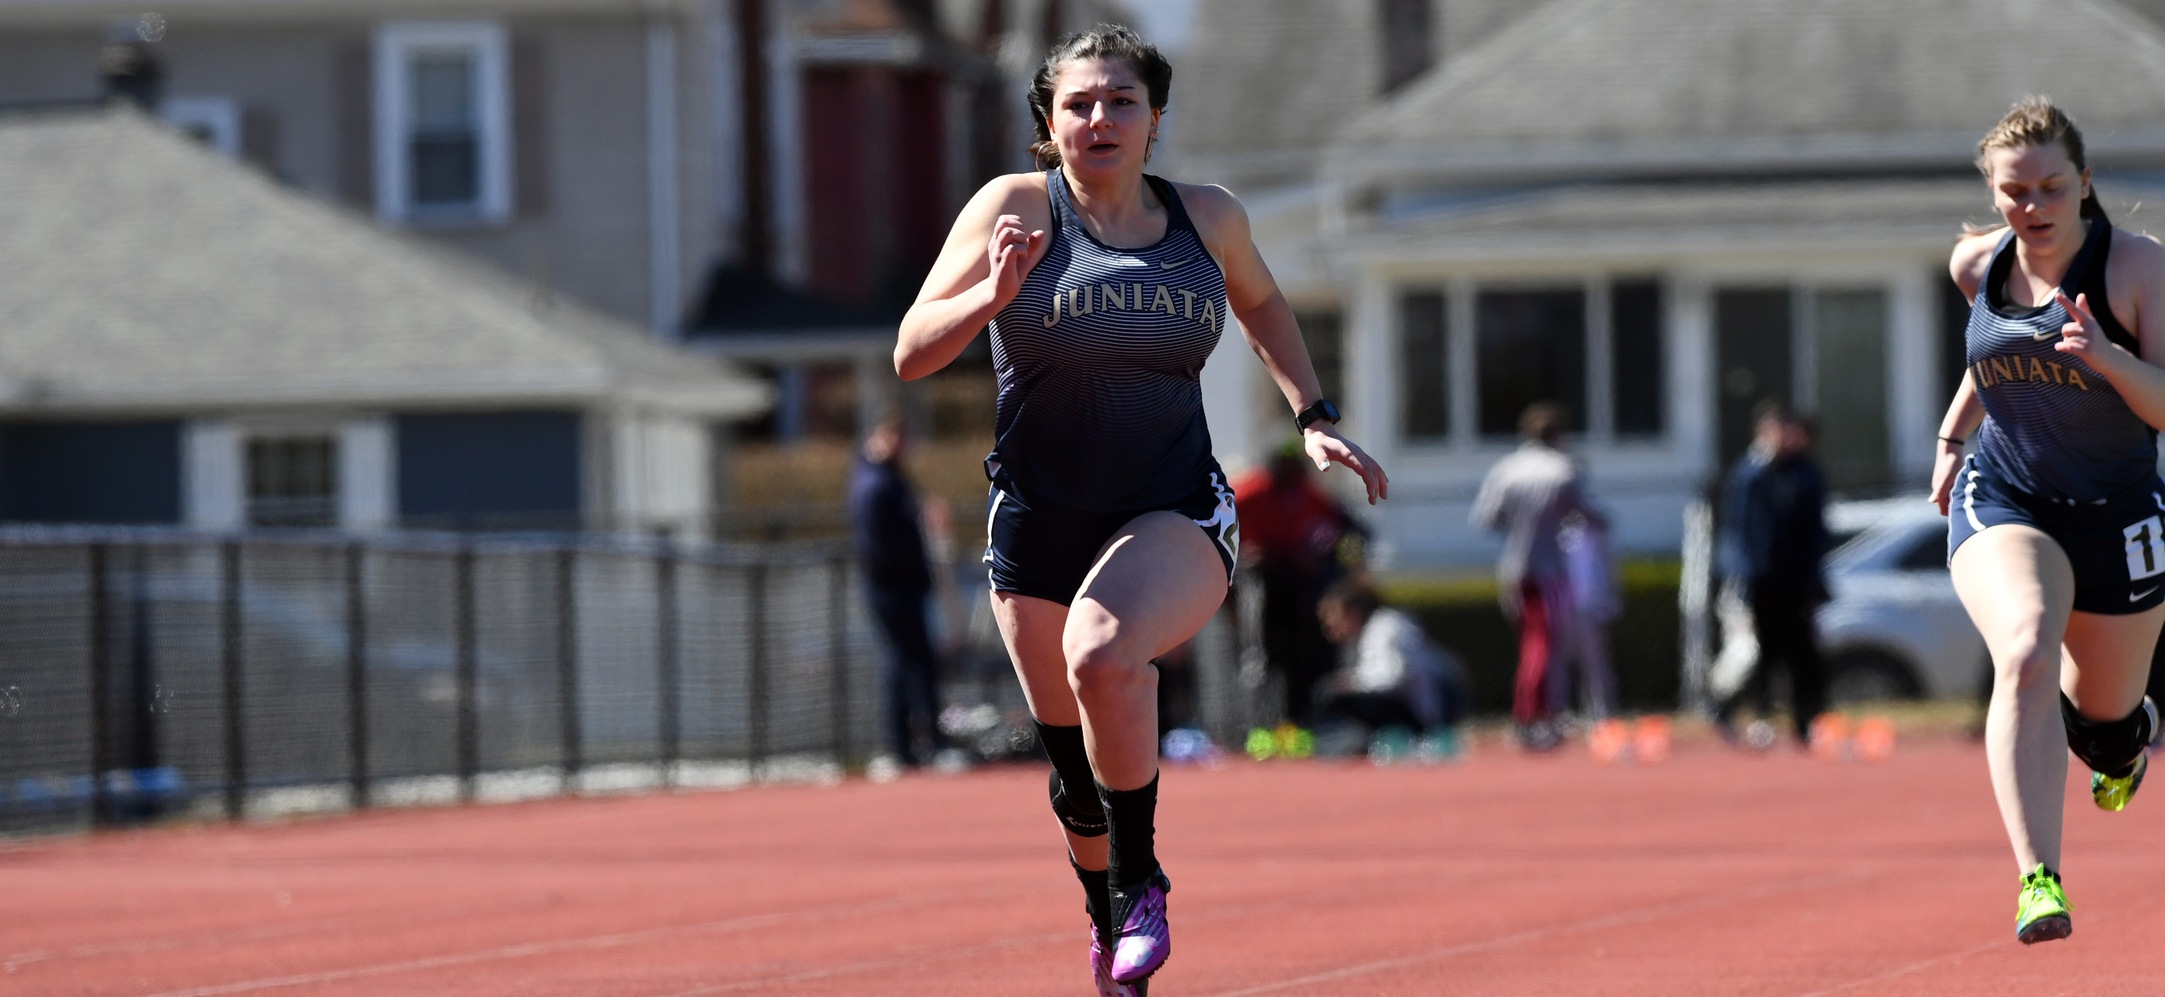 Women's Track and Field Opens Up Season at River Hawks Opener